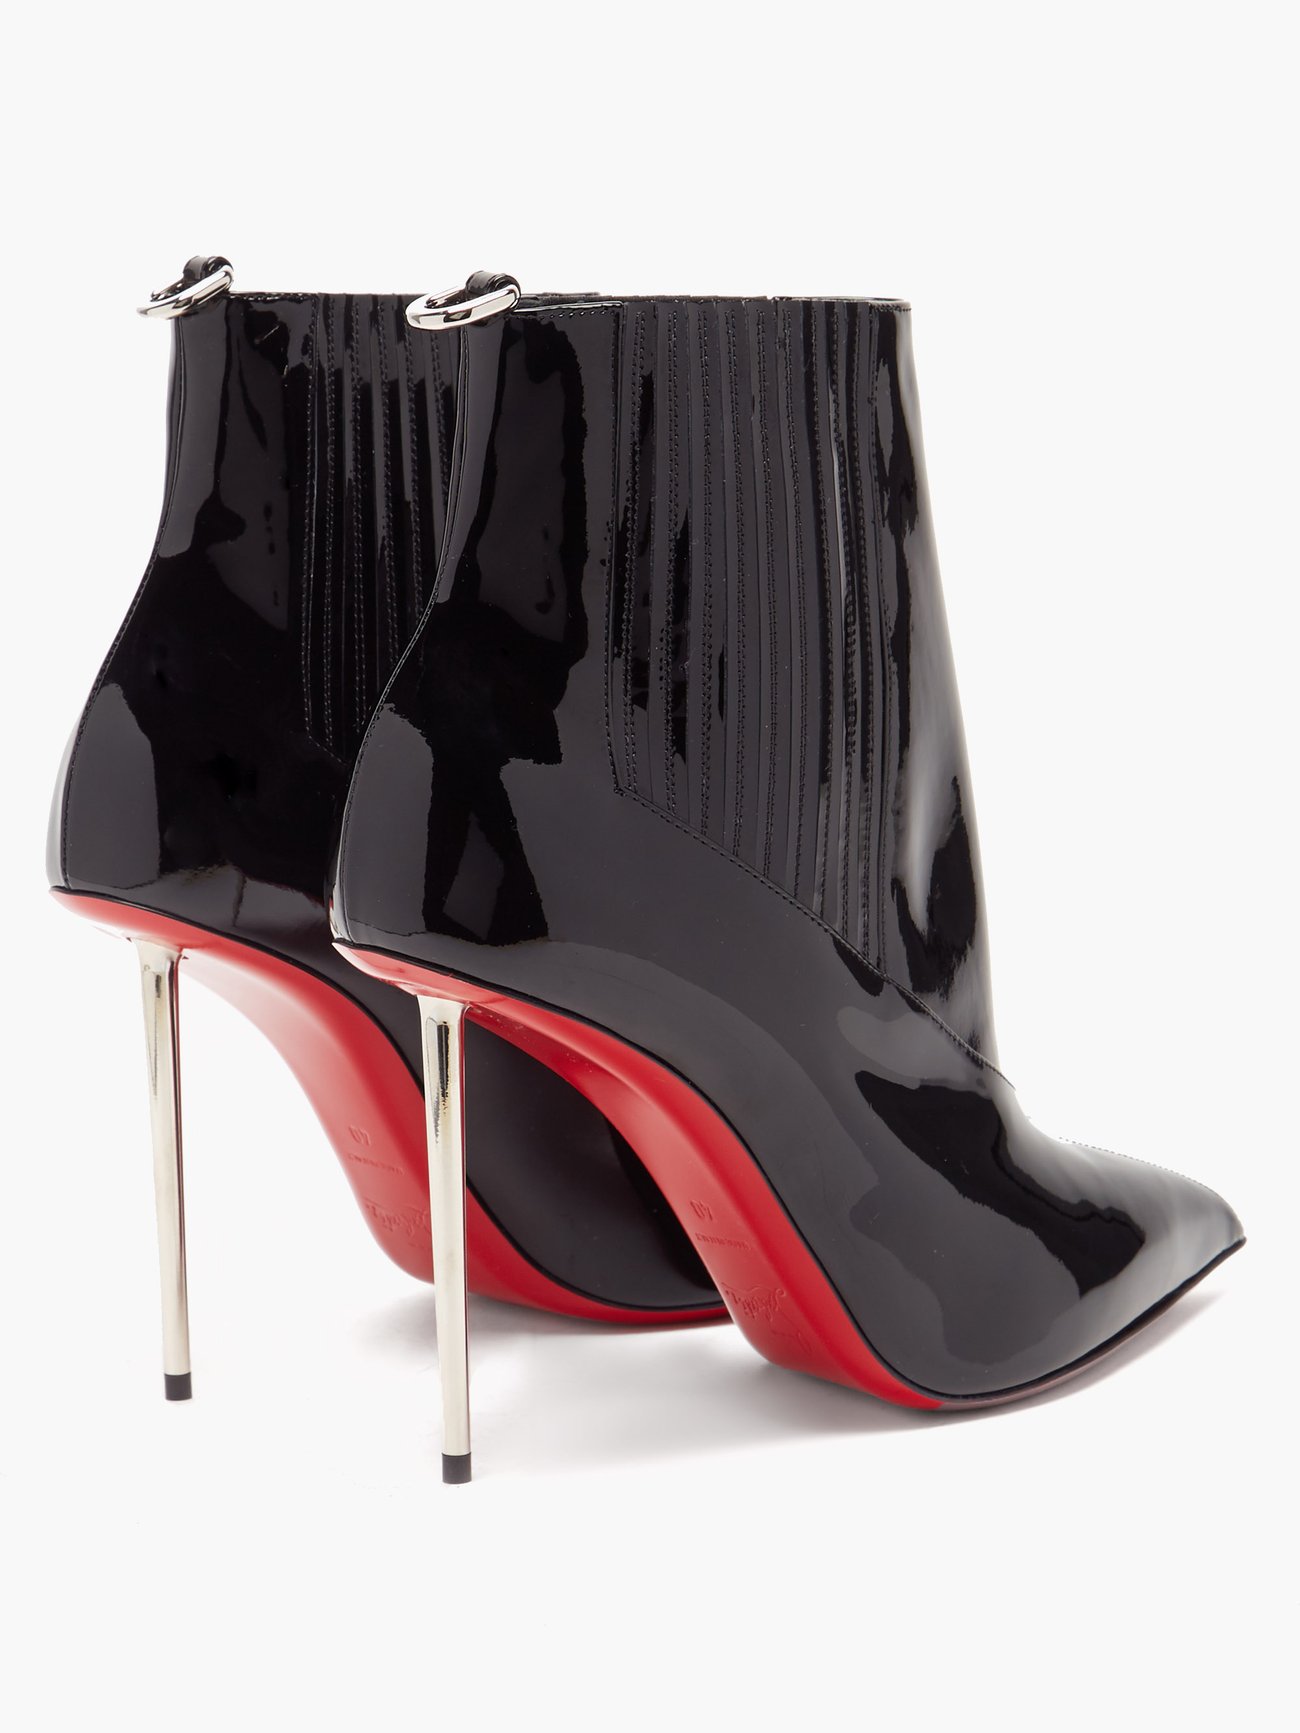 Christian Louboutin - Epic 100 Patent-leather Ankle Boots - Womens - Black